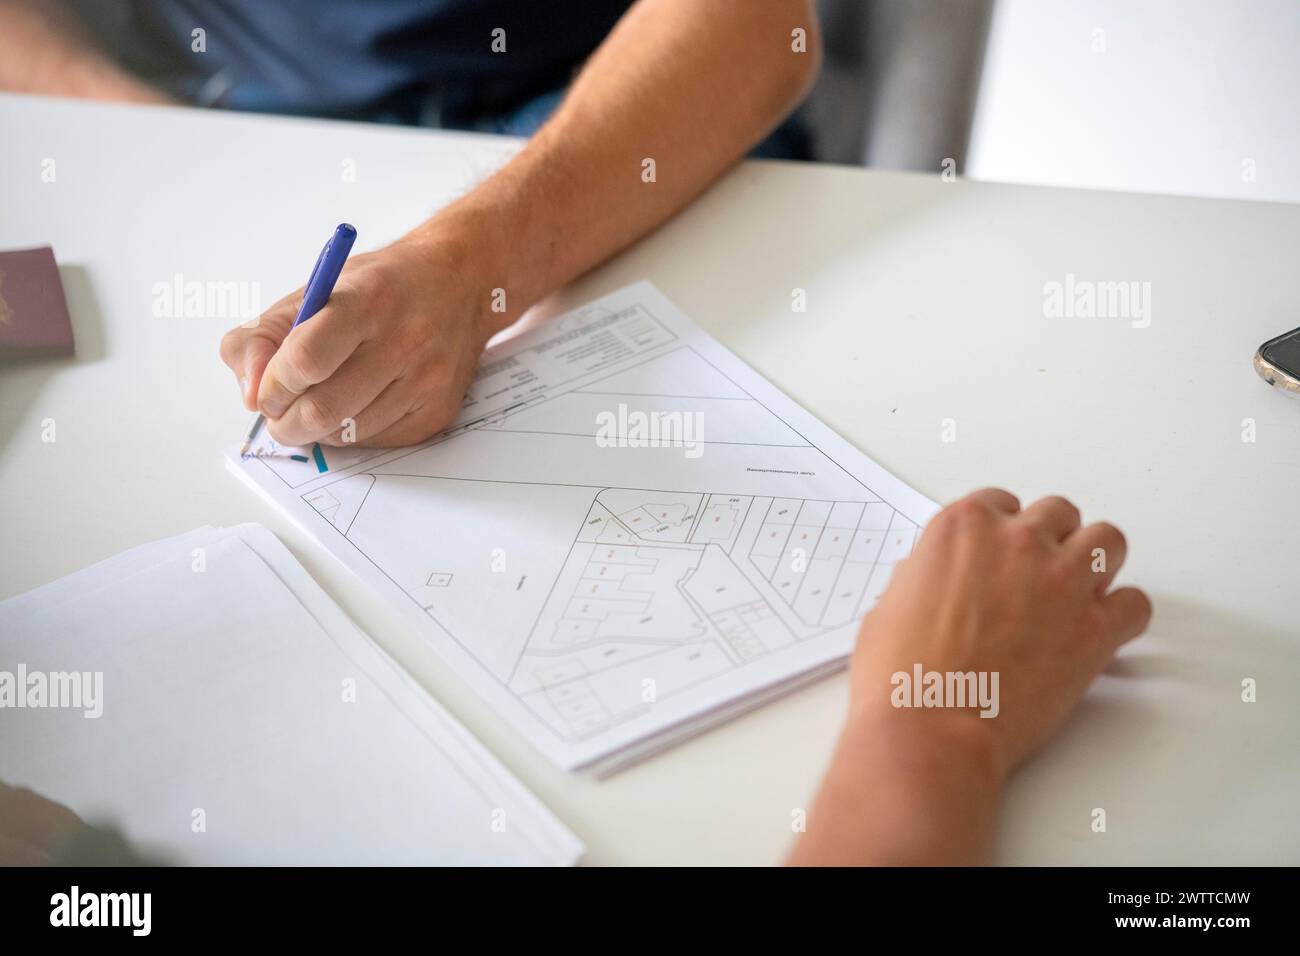 Person sketching architectural plans on a white table. Stock Photo